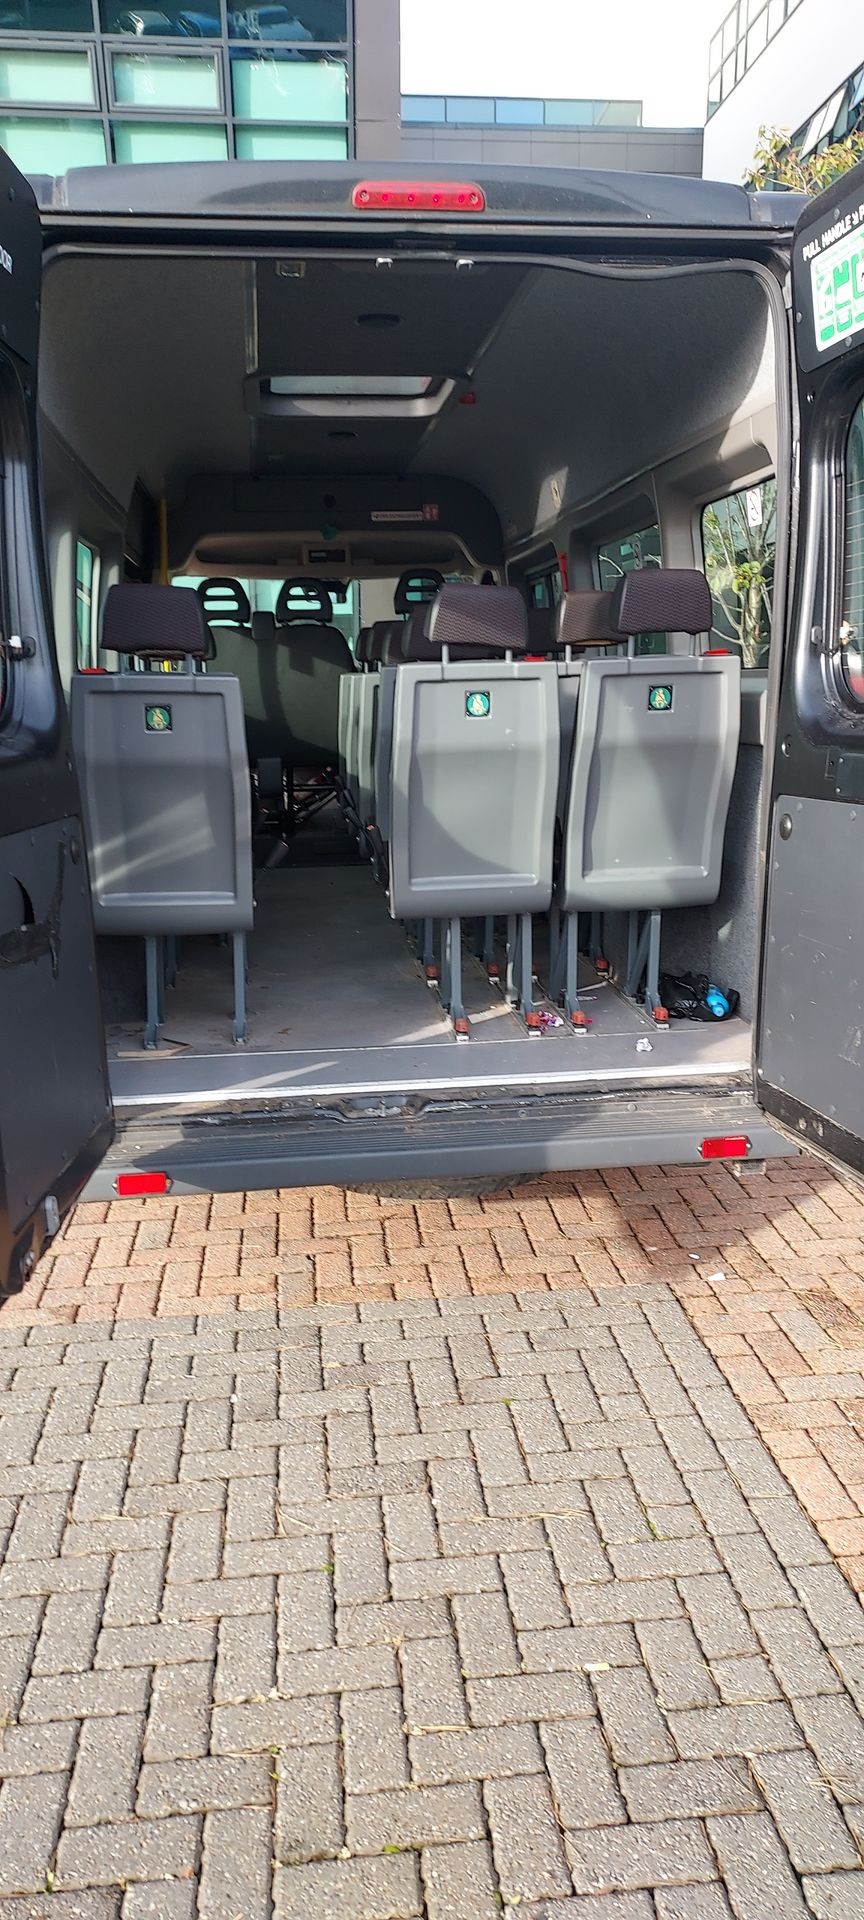 Local Authority Mini Bus assessments